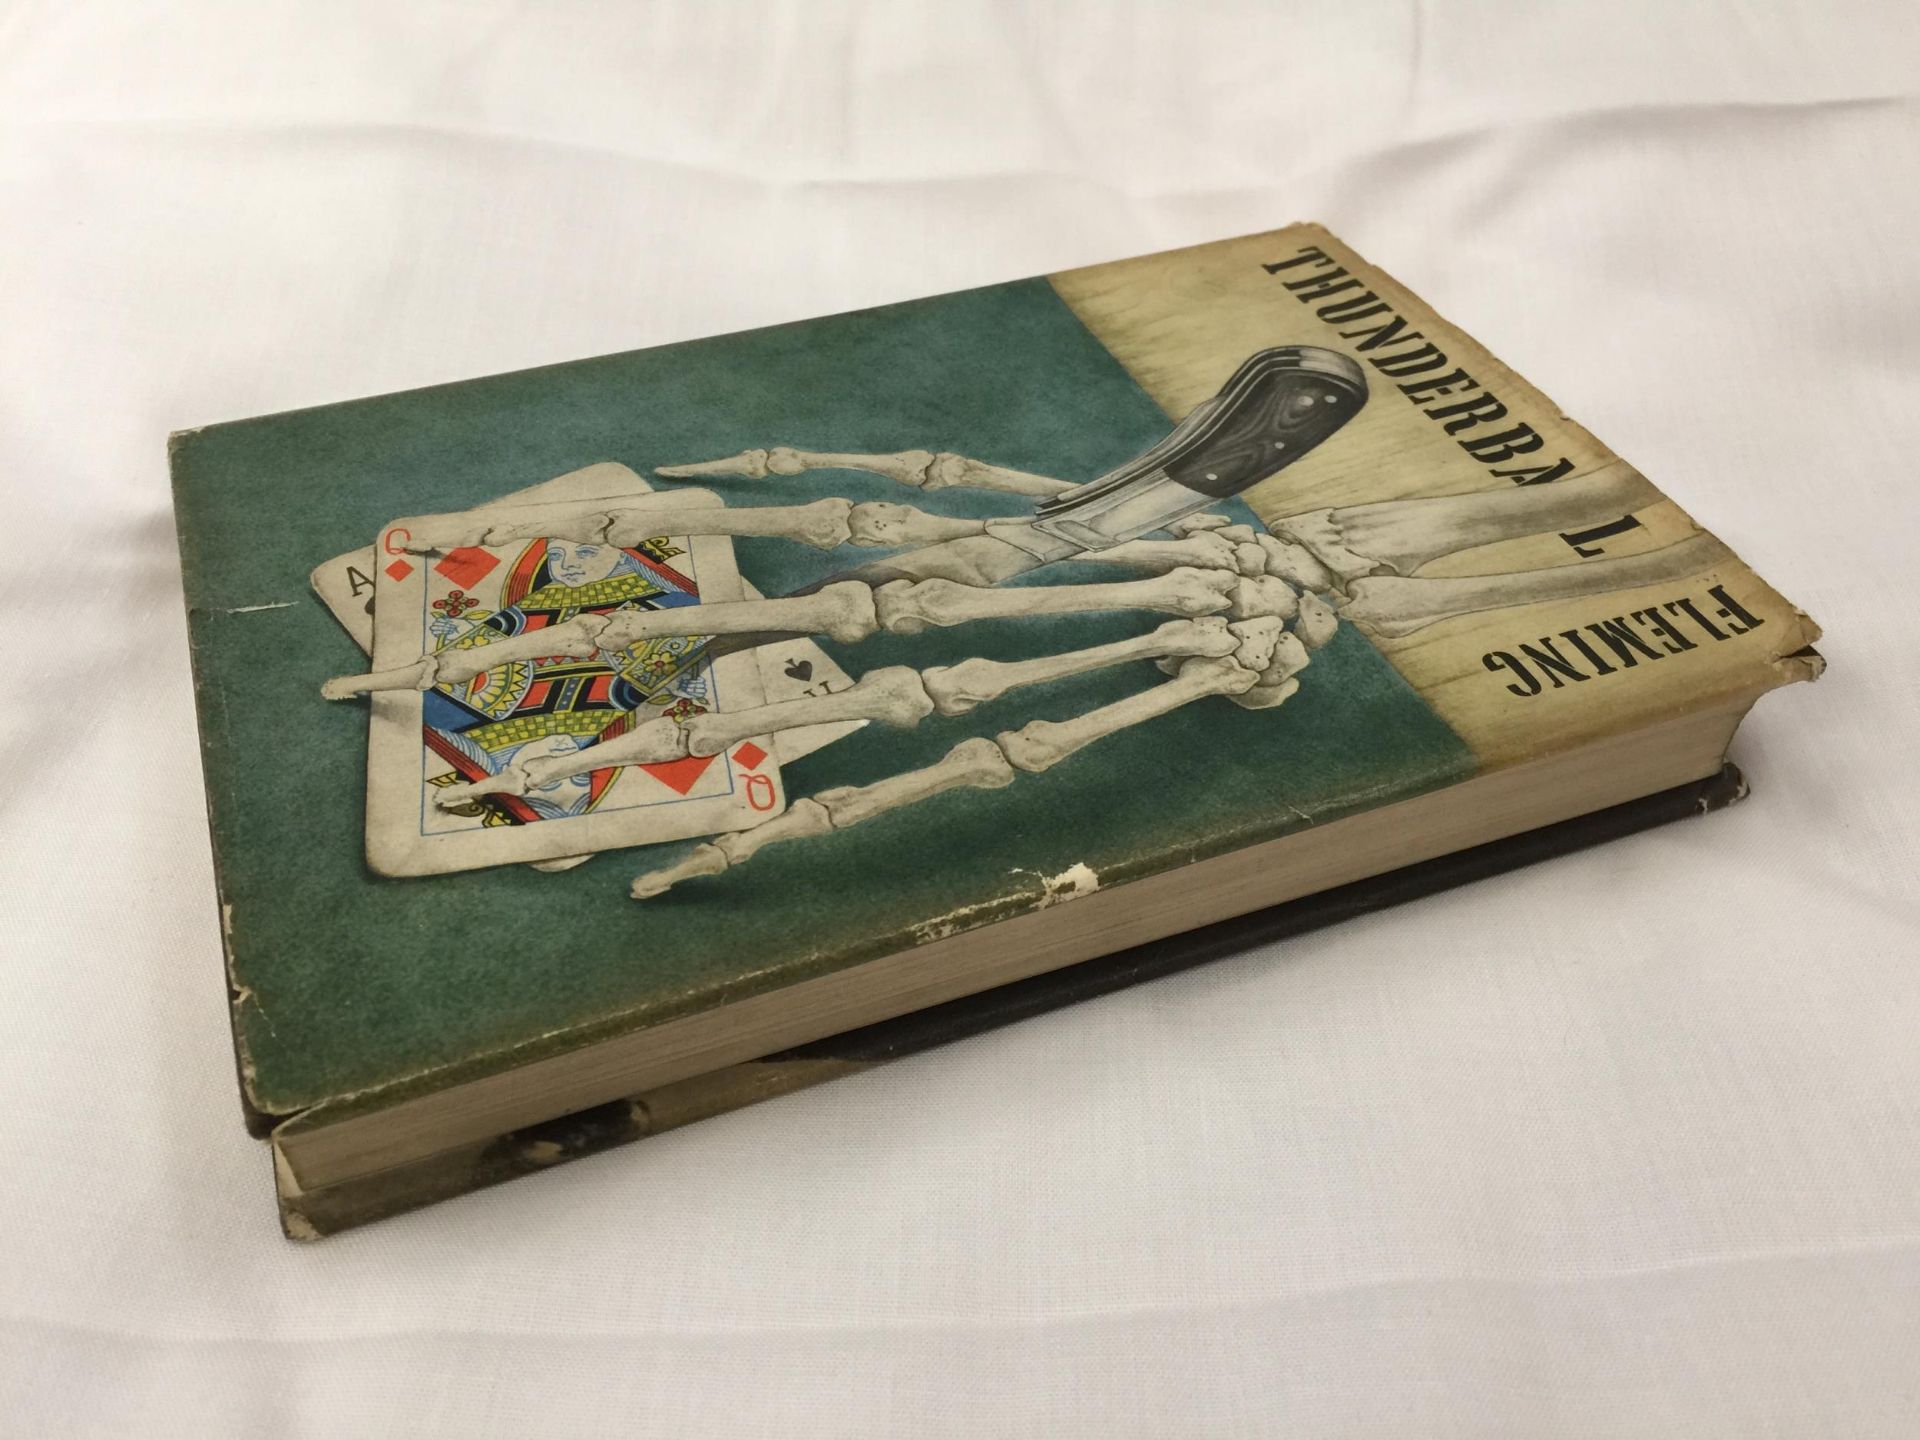 A FIRST EDITION JAMES BOND NOVEL - THUNDERBALL BY IAN FLEMING, HARDBACK WITH ORIGINAL DUST - Image 3 of 12